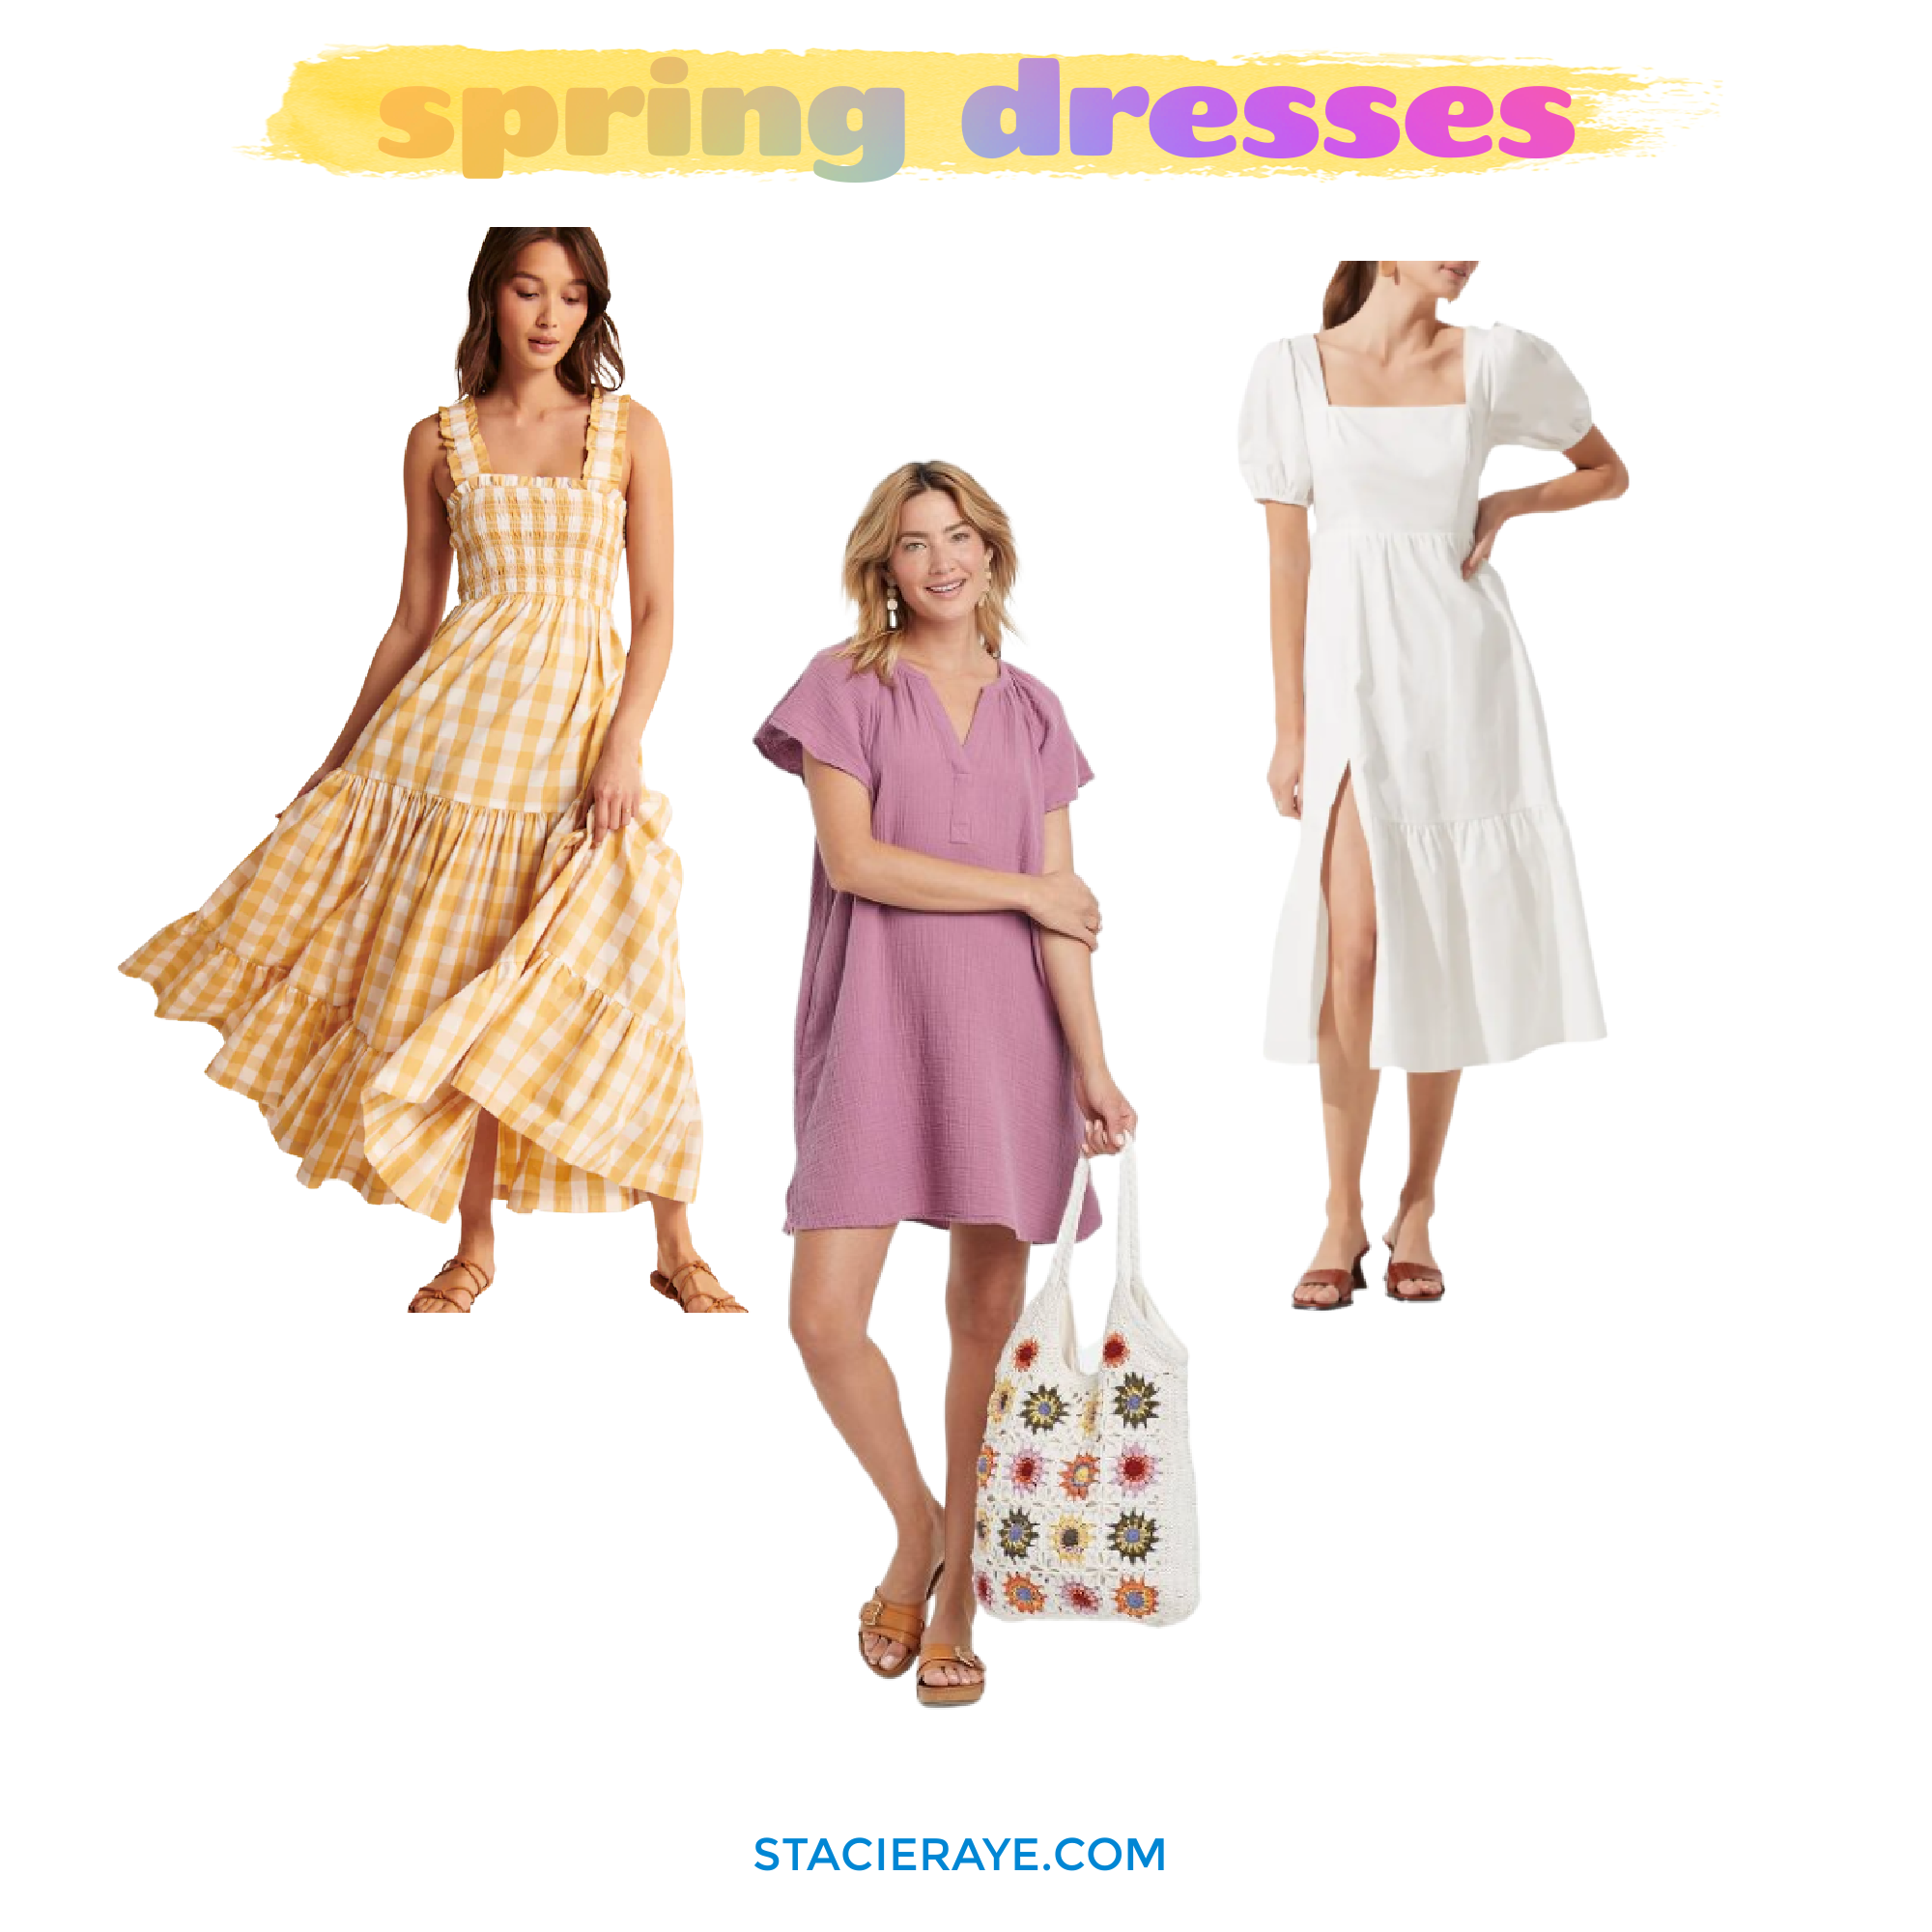 3 Dresses You Need this Spring - Stacie Raye